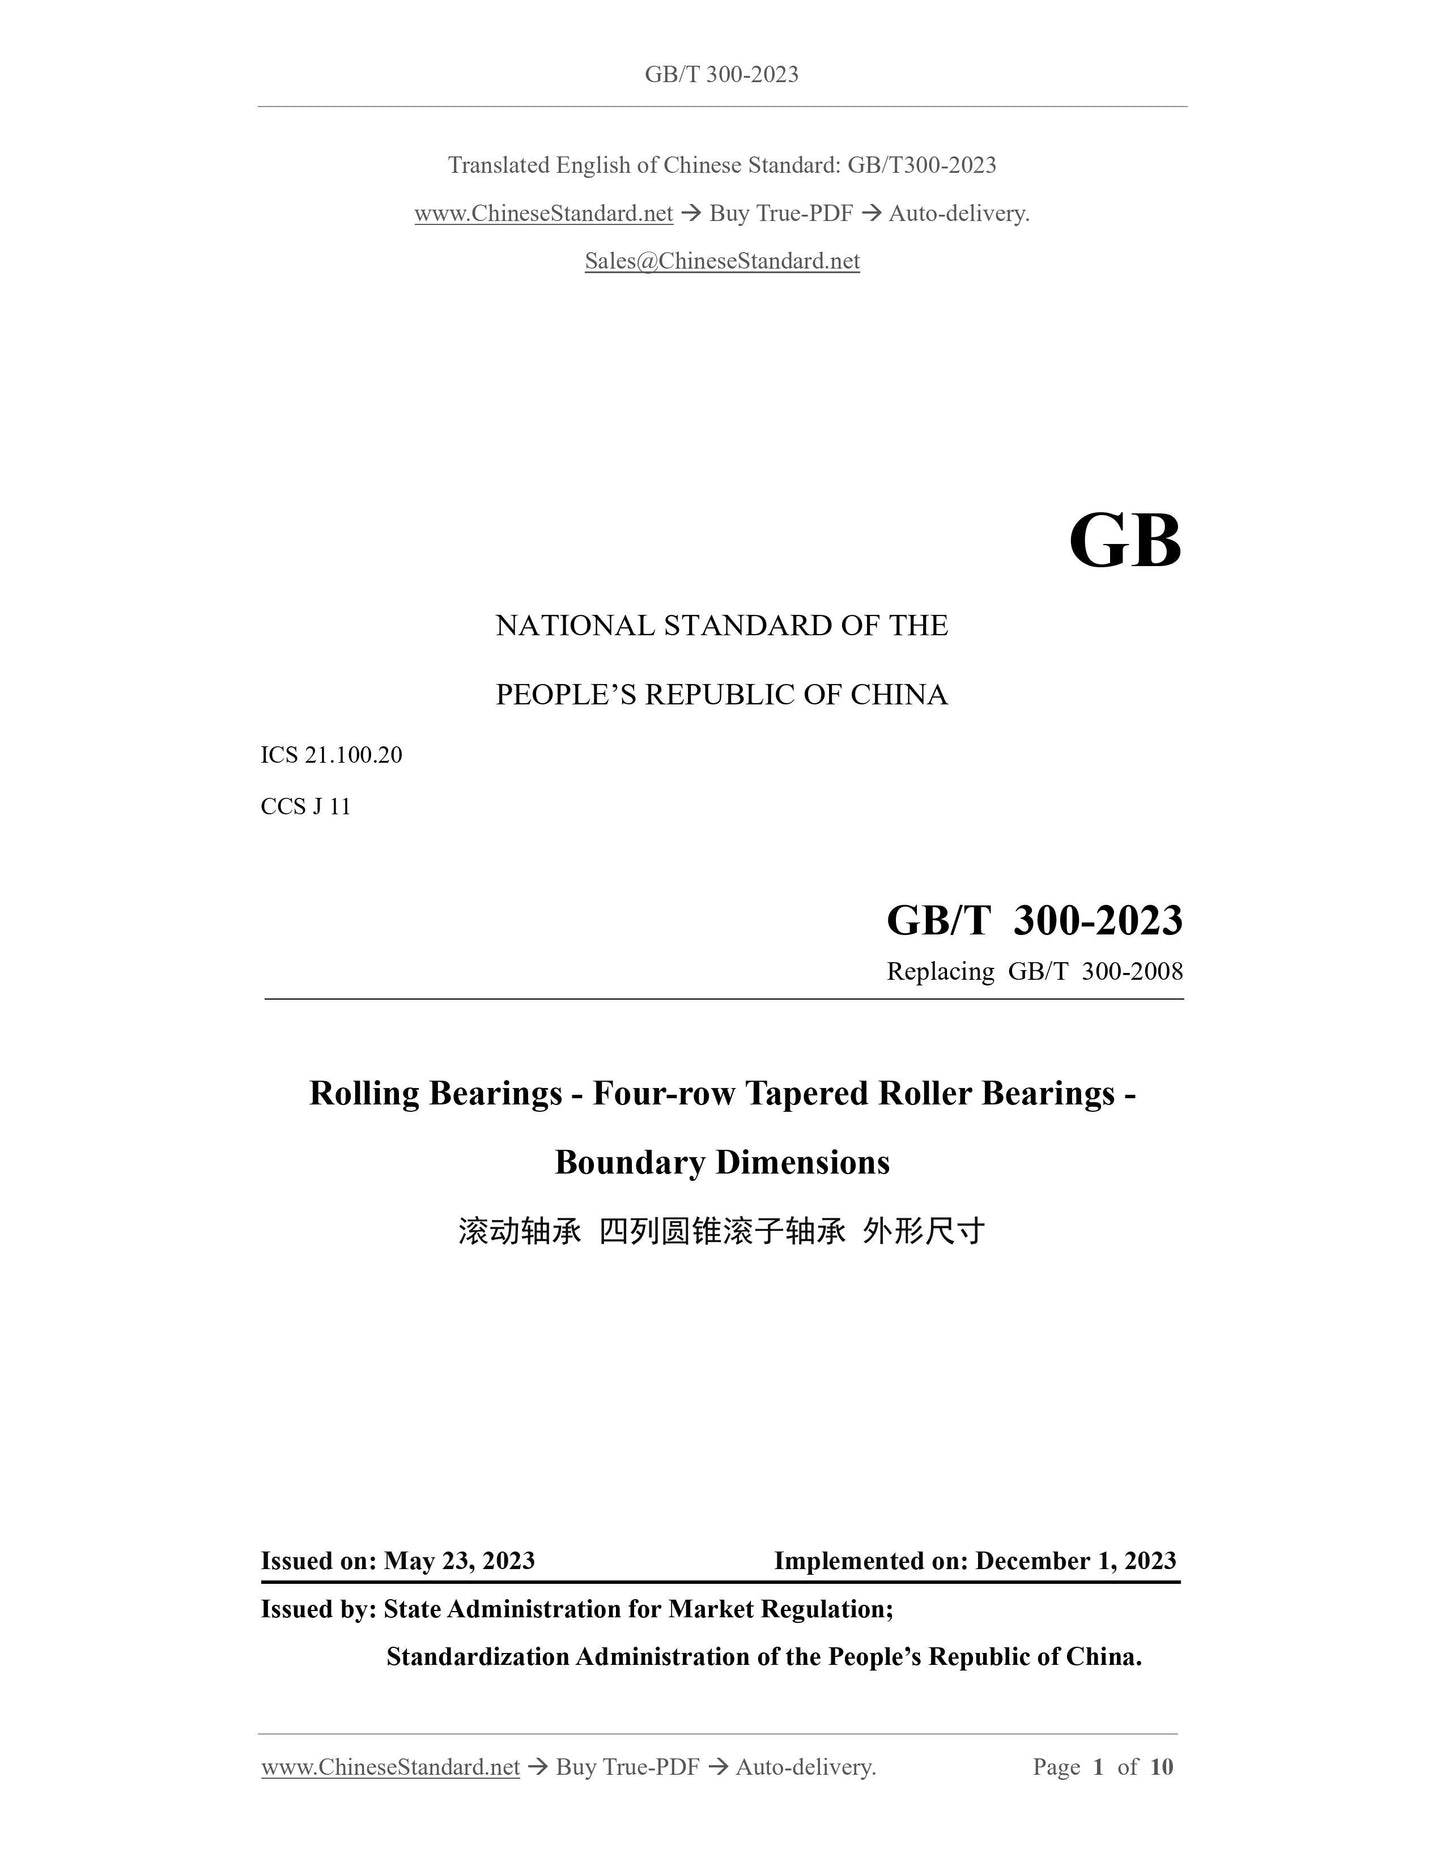 GB/T 300-2023 Page 1